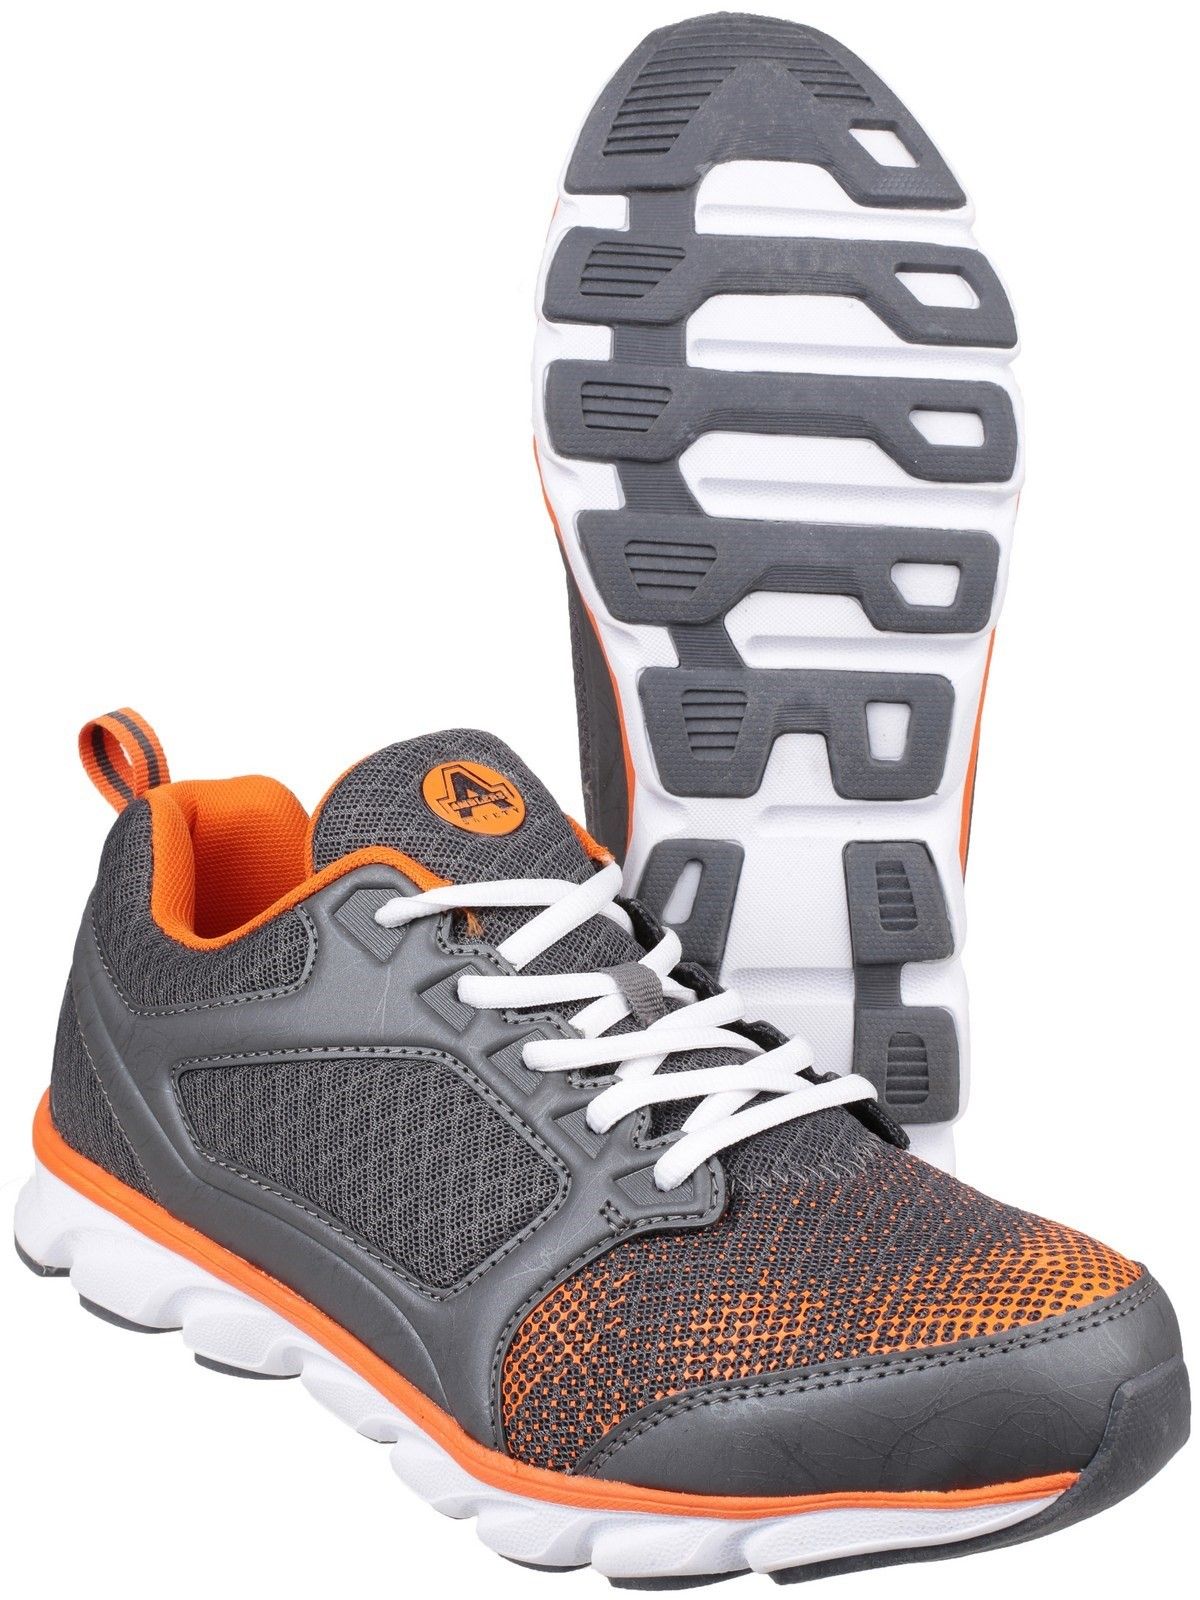 Lightweight sporty safety trainer with athletic breathable moisture wicking mesh upper and flexible traction EVA/Rubber outsoleNon-Leather PU & Mesh Upper. 
Moisture Wicking Breathable Mesh Lining. 
200 Joules Steel Toecap. 
Anti-penetration Non-Metal Midsole. 
Padded Mesh Collar and Tongue.